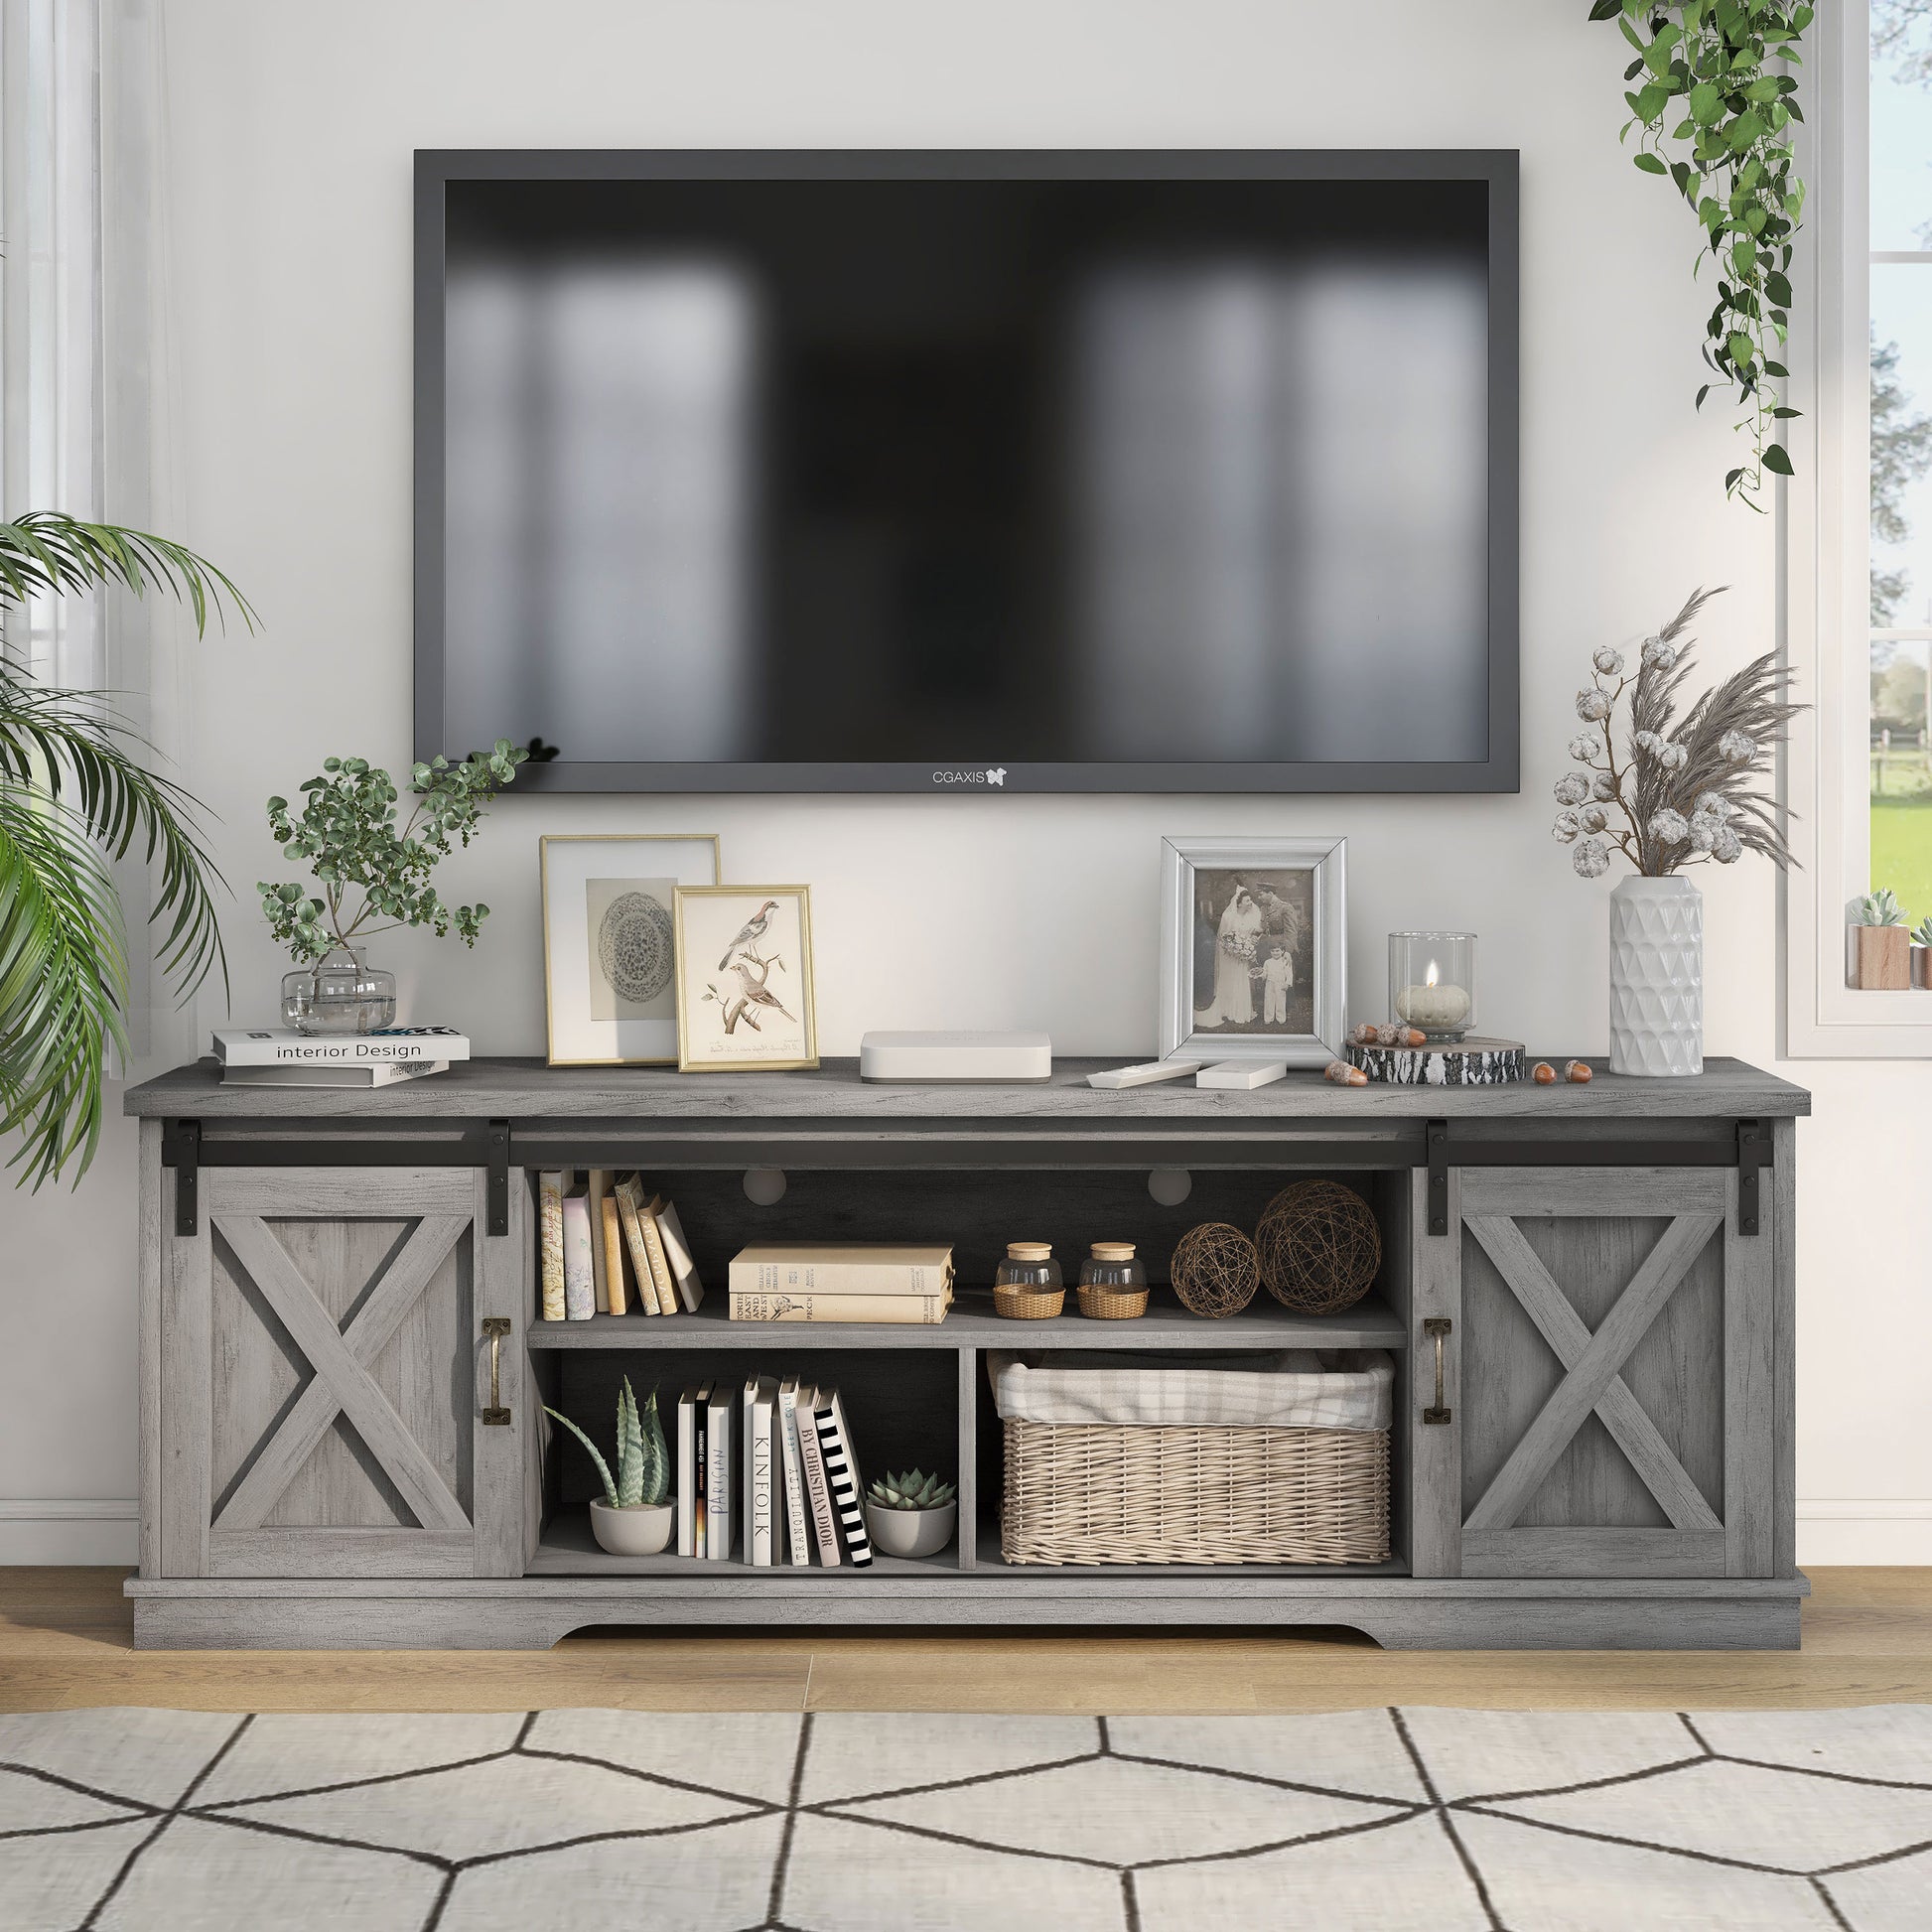 Front-facing rustic vintage gray oak three-shelf two-cabinet TV stand in a living room with accessories